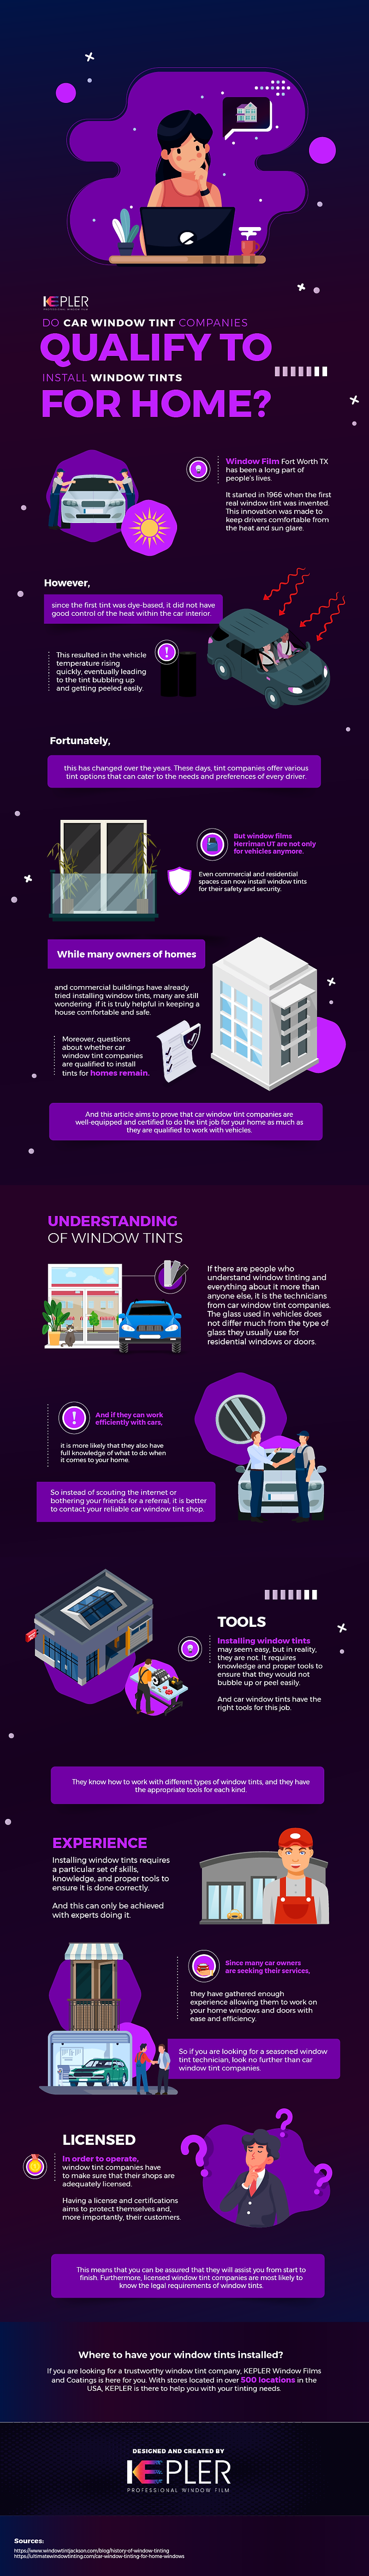 Car Window Tinting Companies Qualify to Install Window Tinting for Home - Infographic